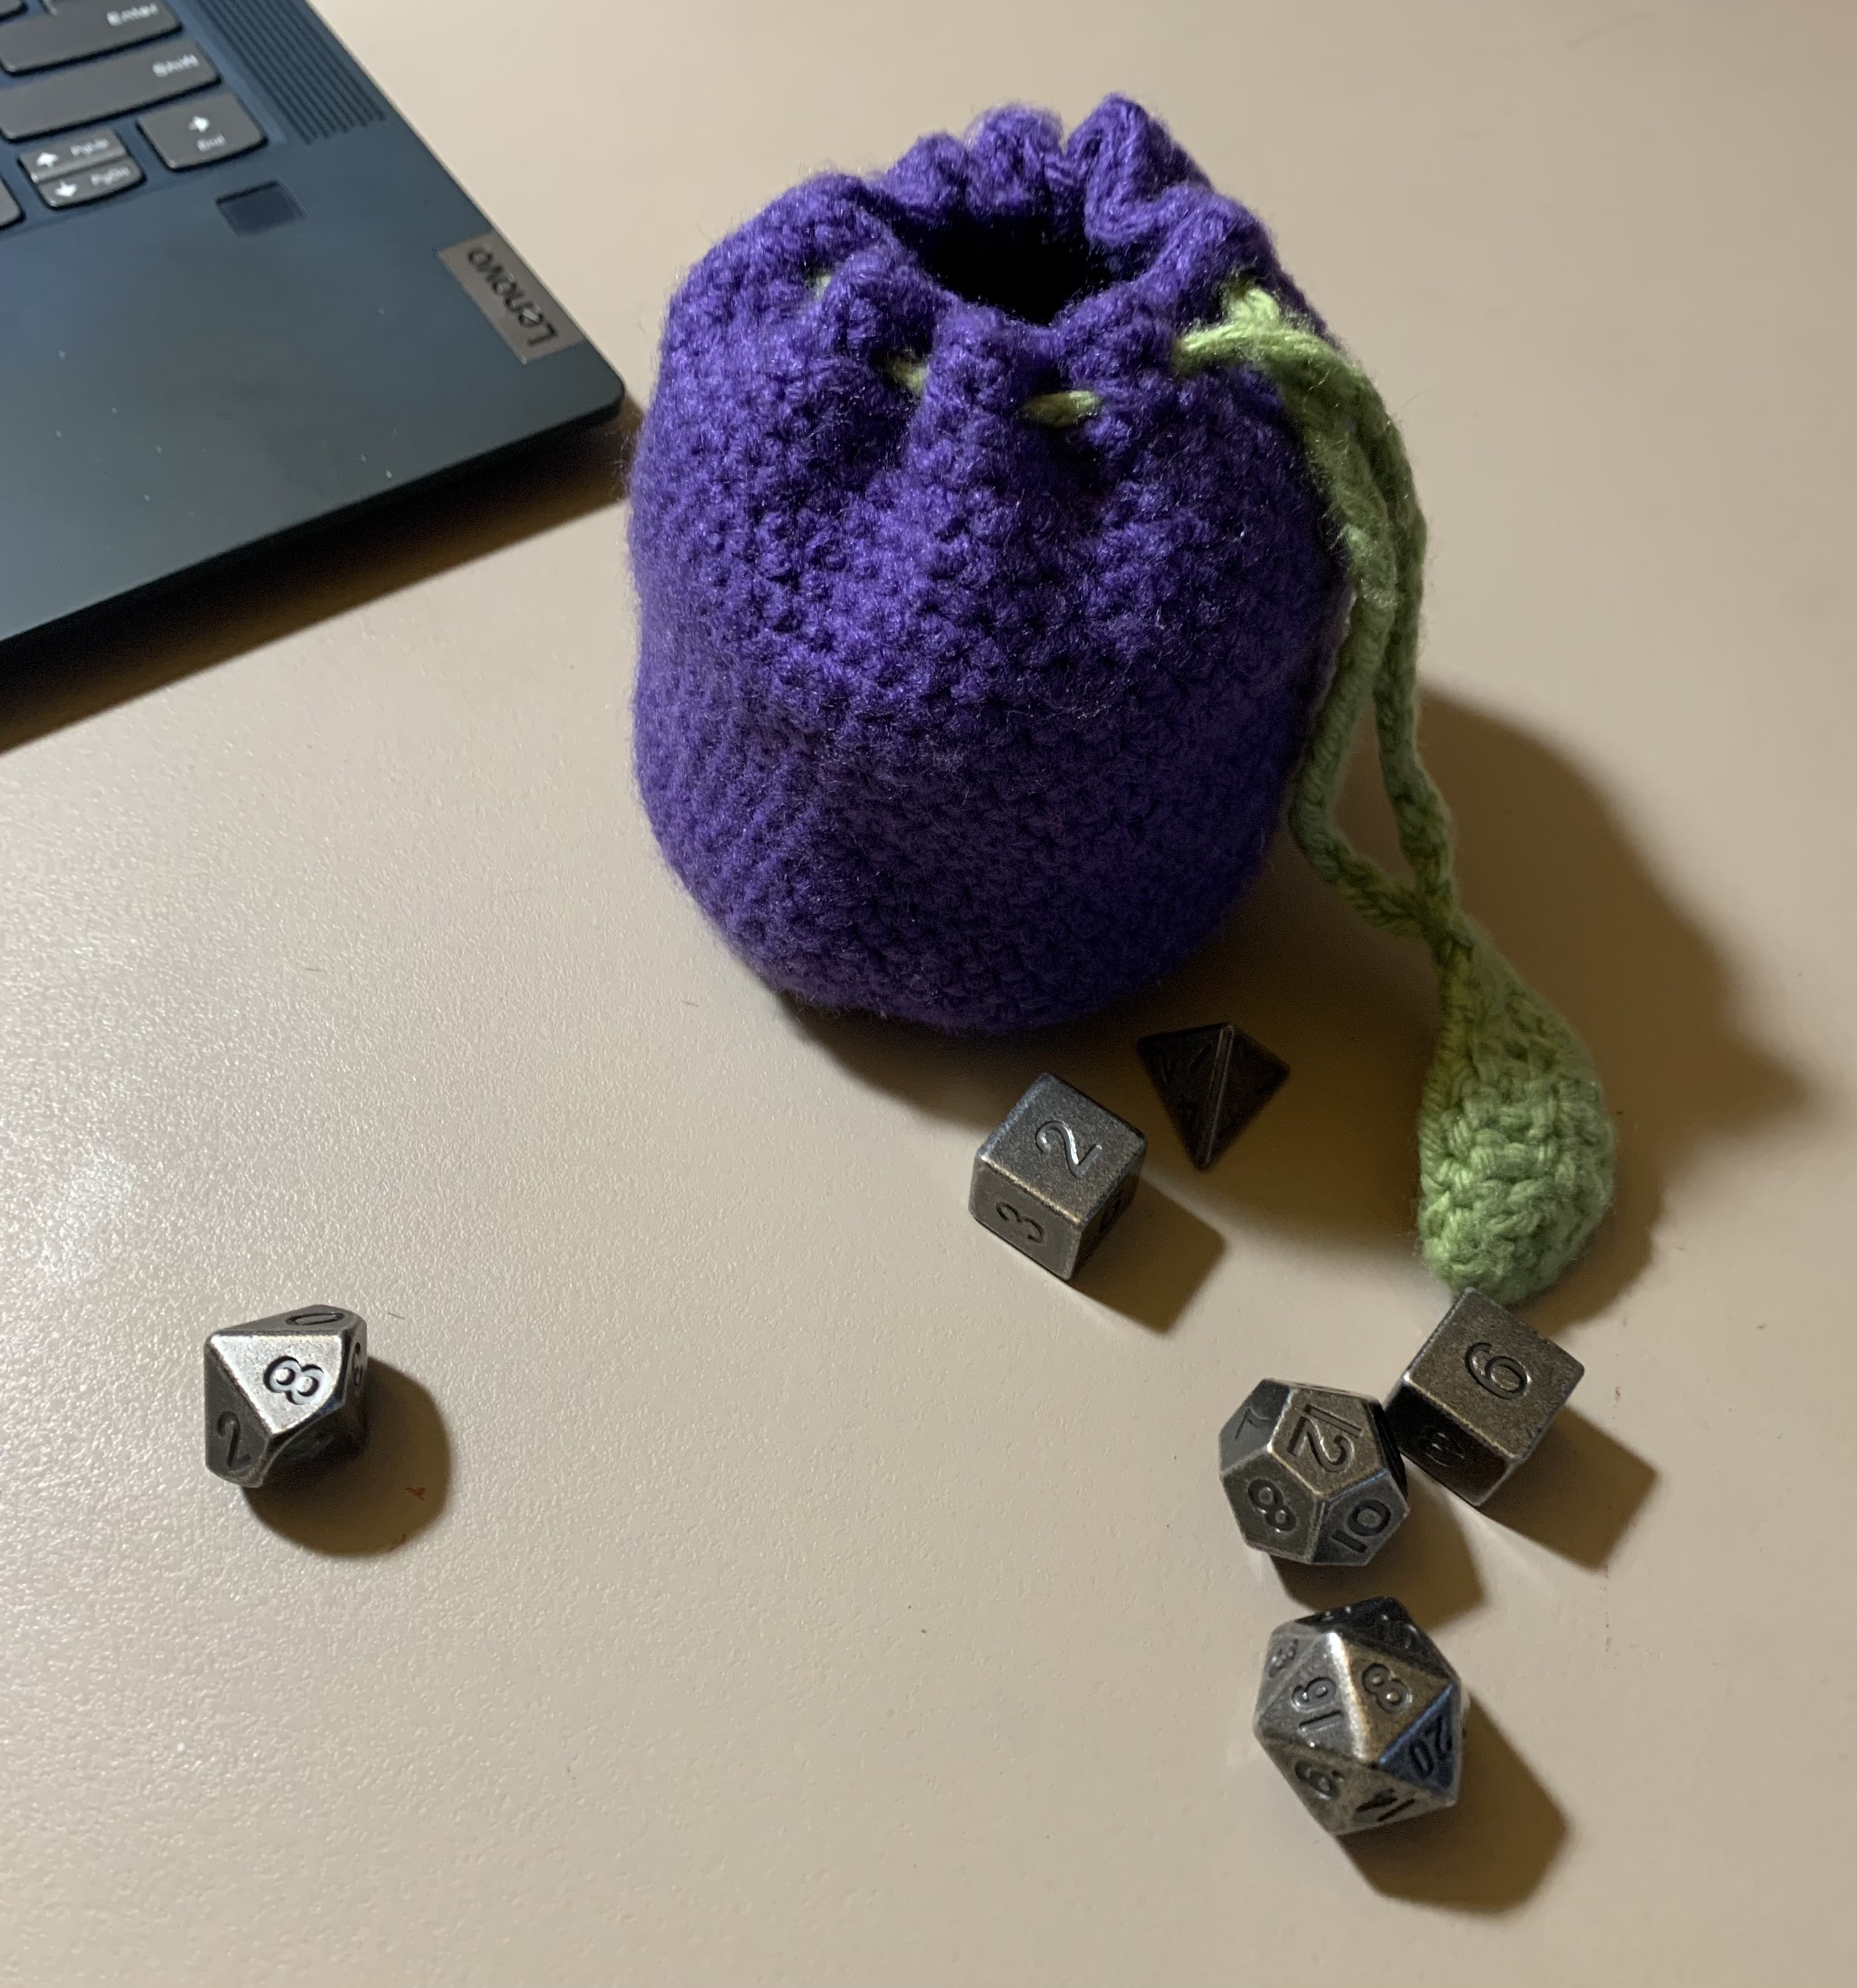 A purple dice bag with a leaf-shaped drawstring